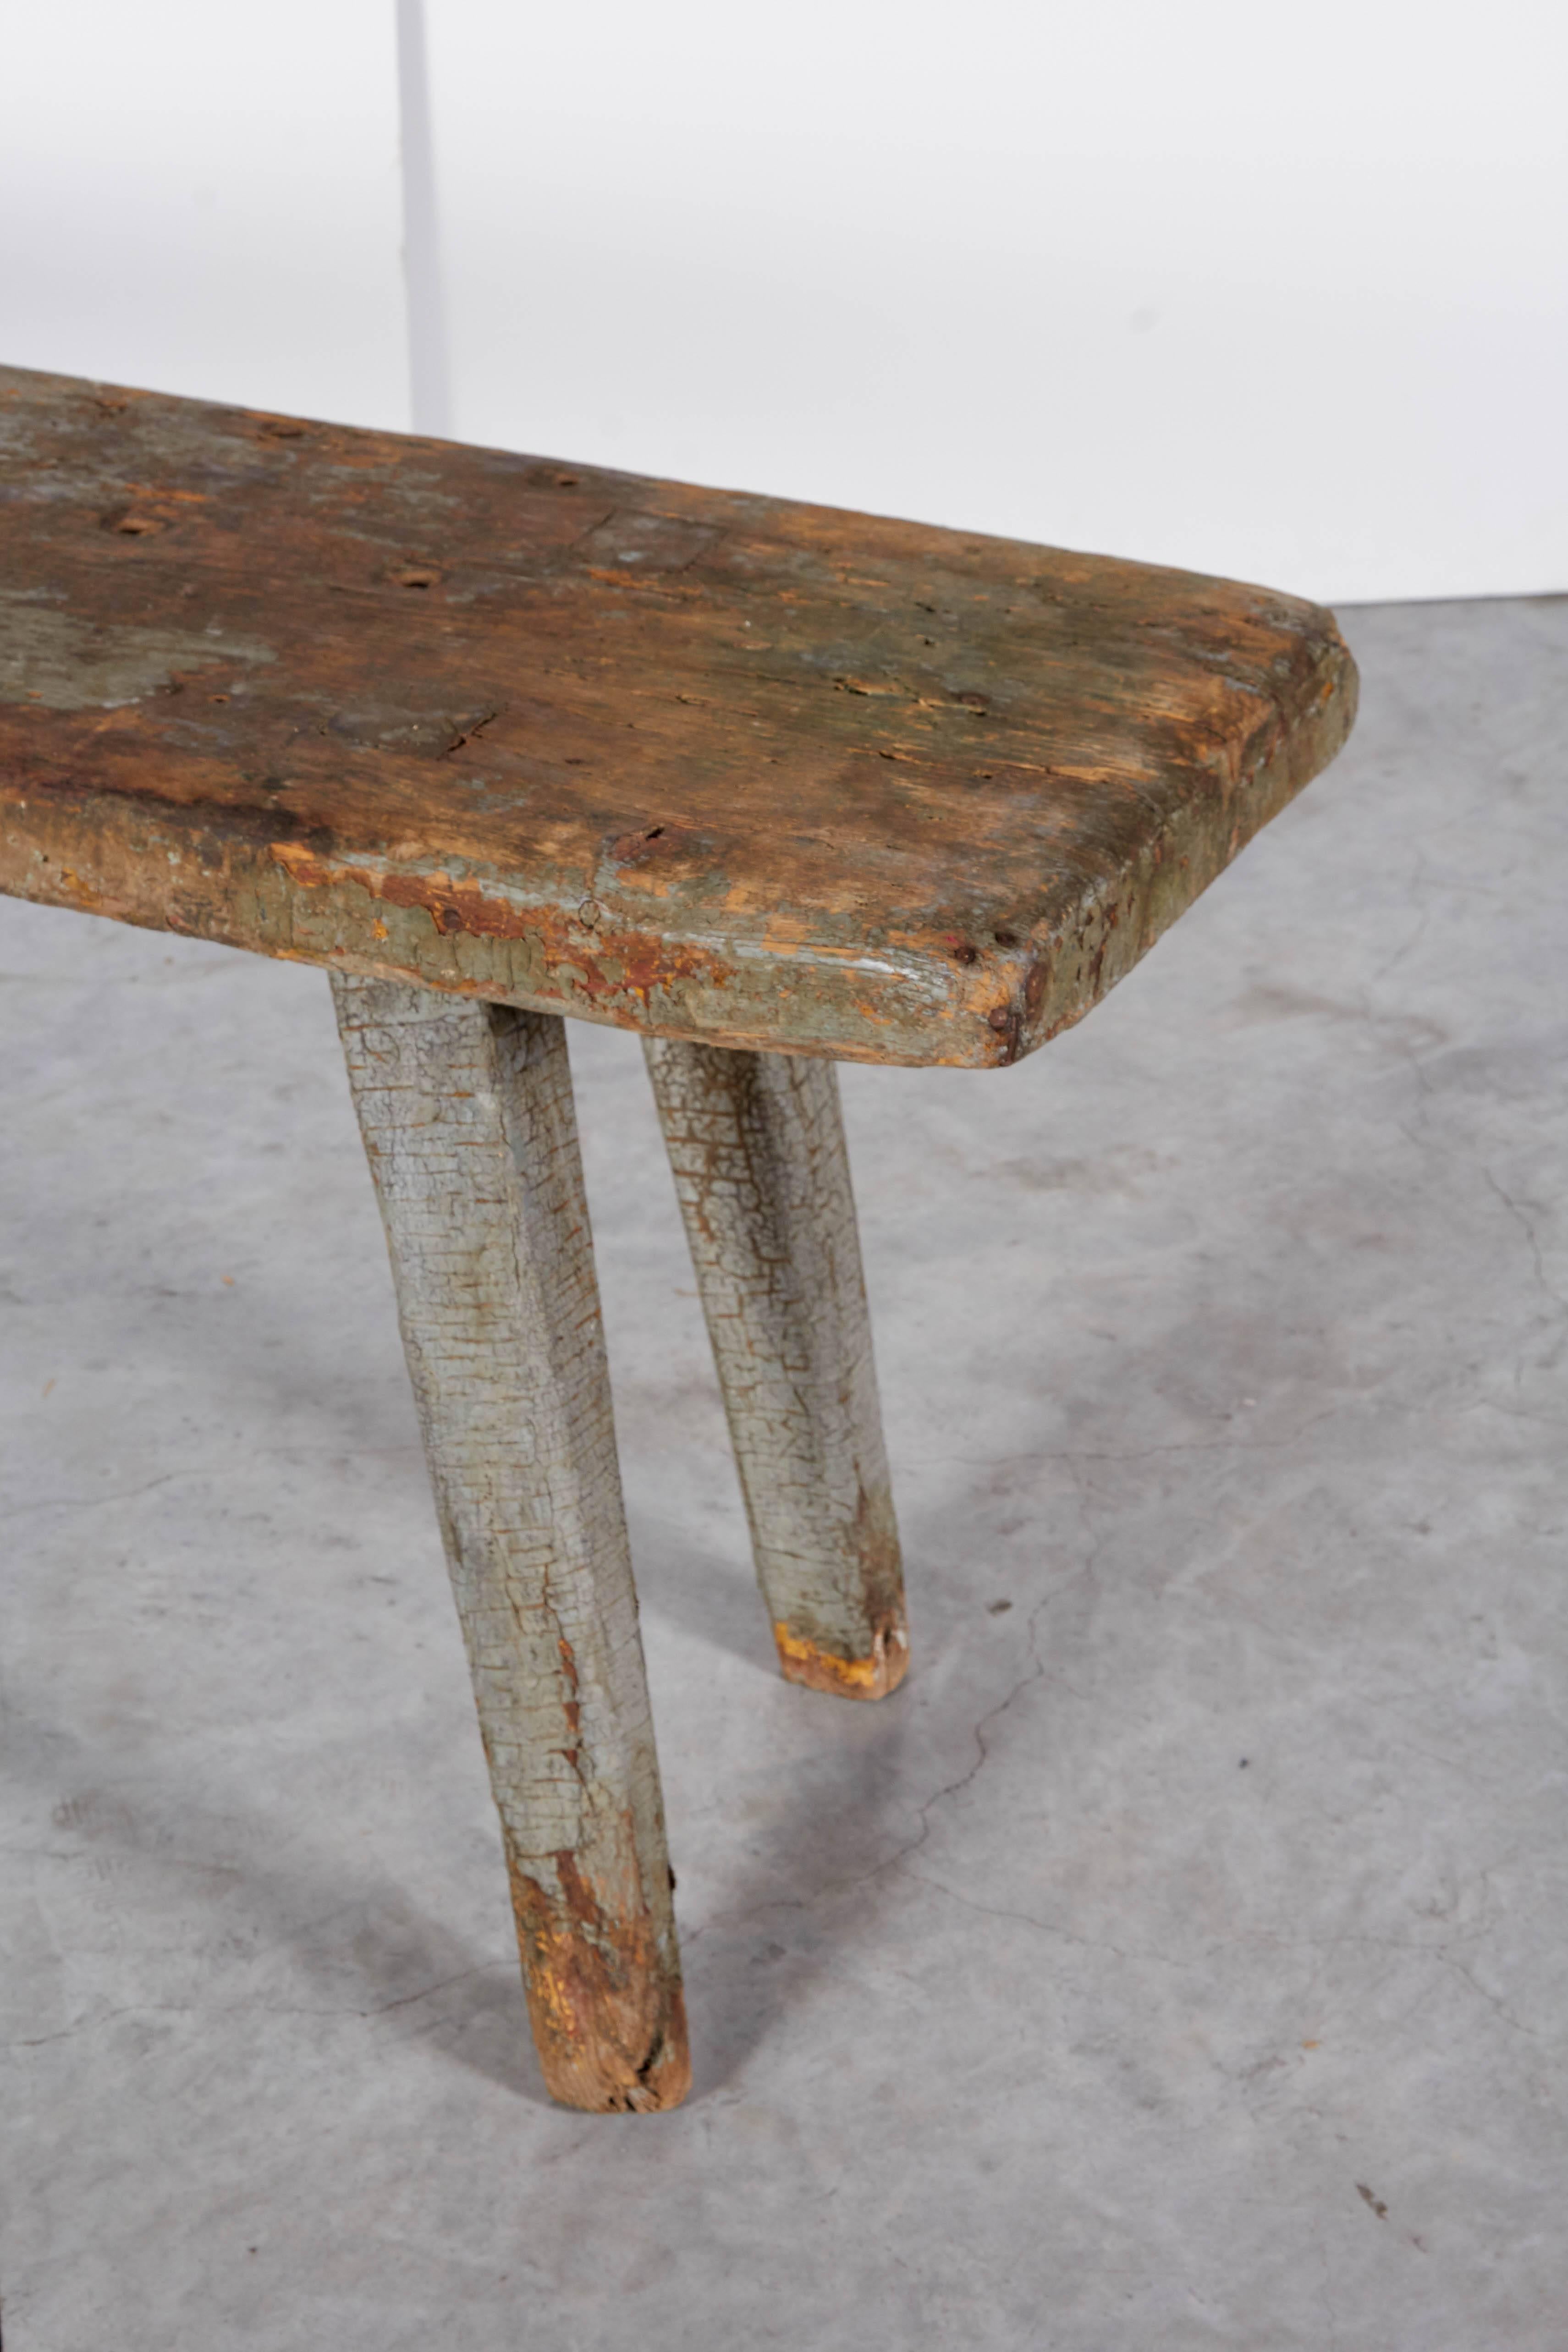 Perfectly Worn New England Bench, Great Patina, Old Paint 1